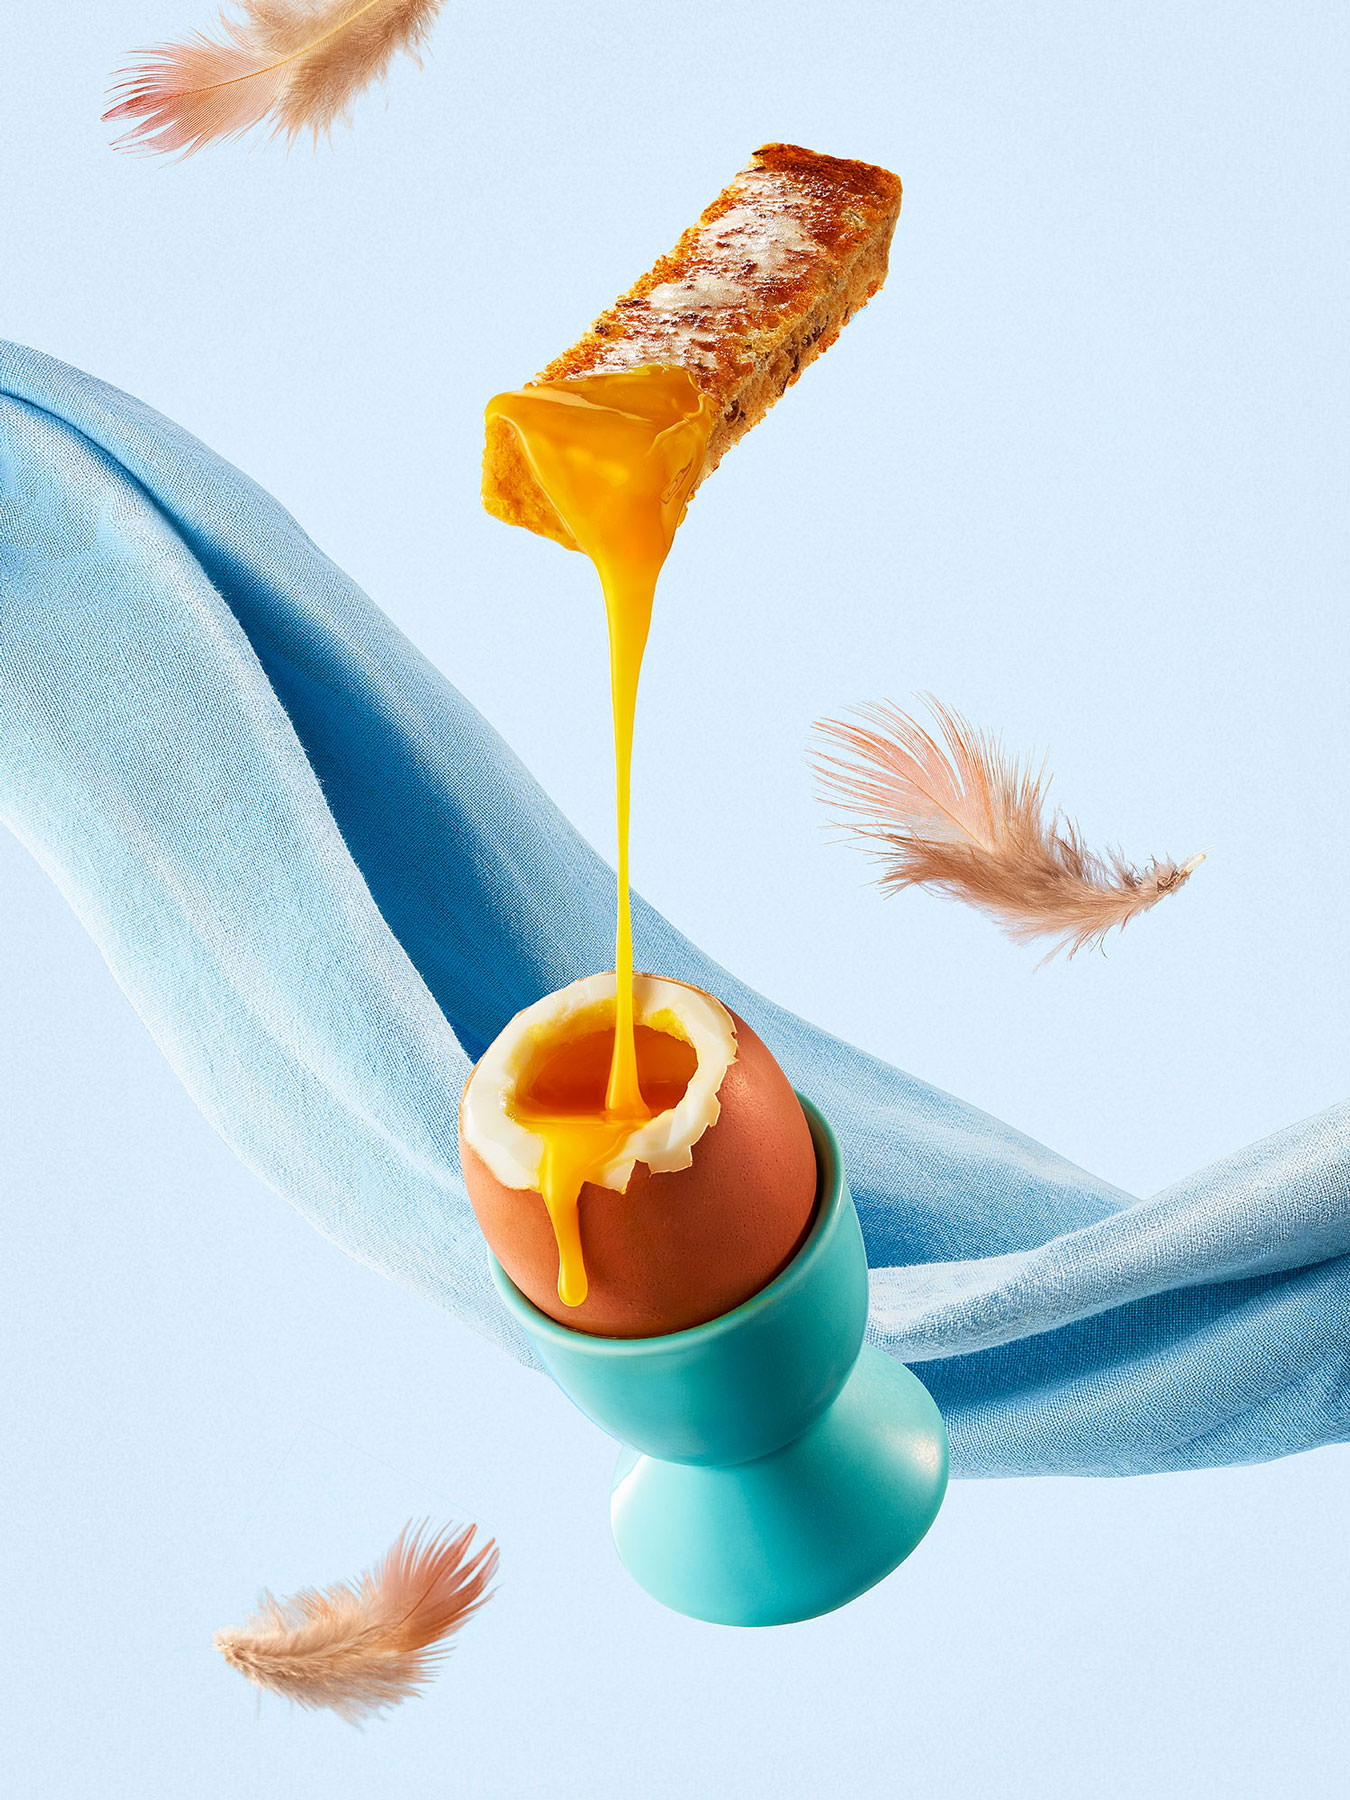 Egg and soldiers floating in mid air with runny yolk and feathers flying, set upon a blue background - London Food & Drinks Photographer